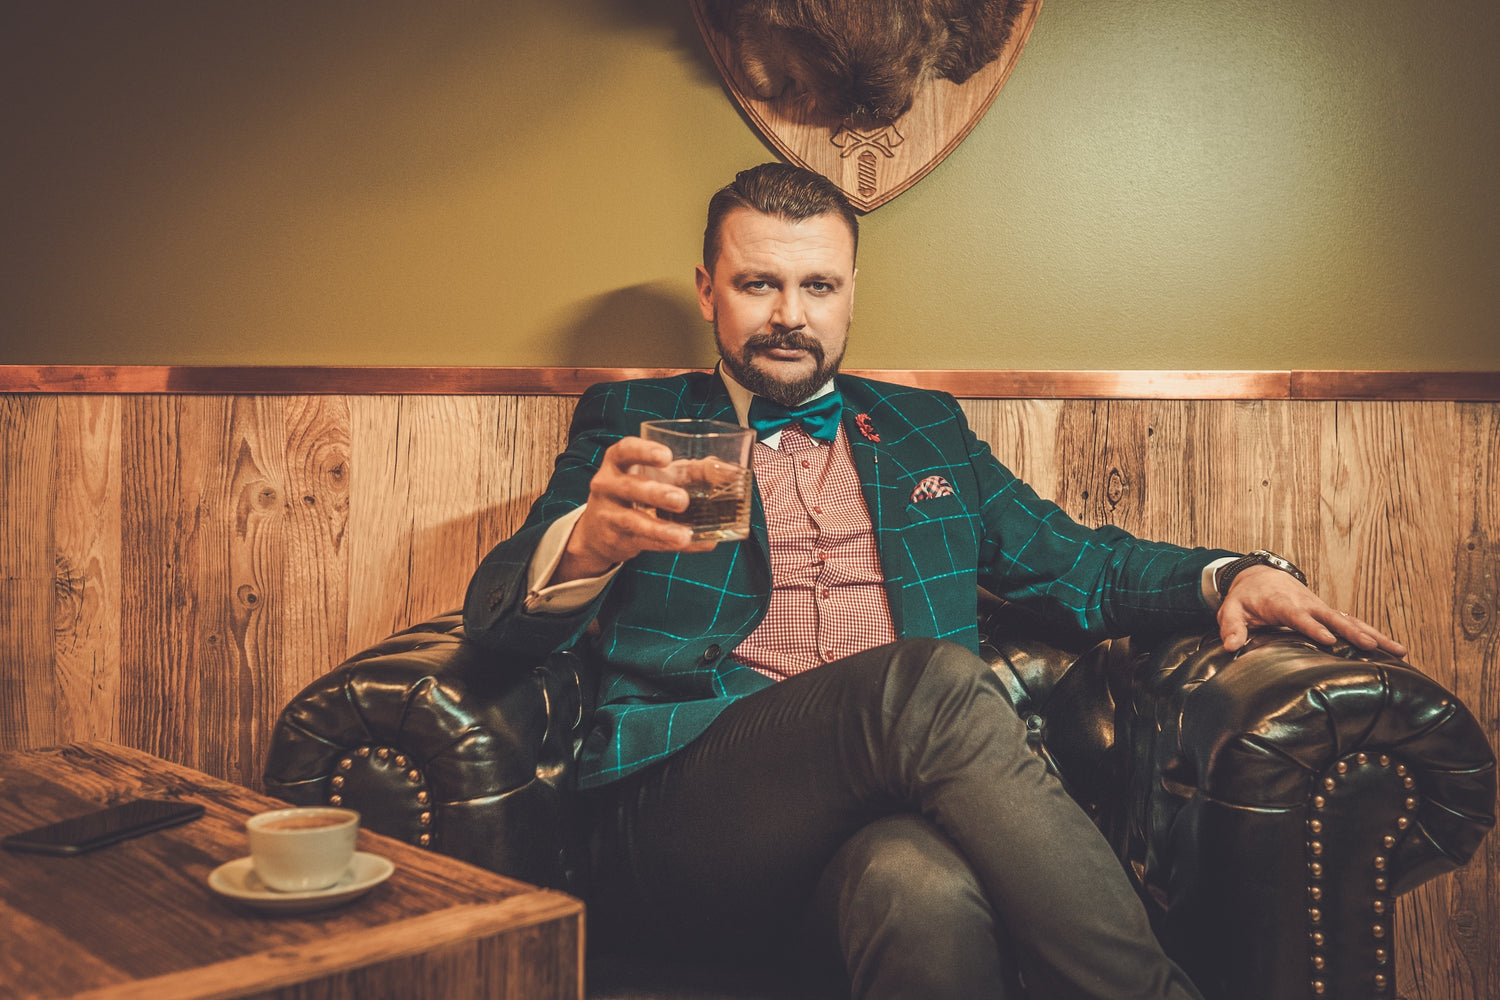 Well-dressed bearded man, adorned in a green windowpane sportcoat, elegantly seated in a leather chair. Behind him, the wall is adorned with a deer euro mount, adding to the room's sophisticated ambiance. He sports an inviting smirk and confidently extends a glass of scotch towards the viewer, capturing a moment of camaraderie as if proposing a toast or cheers.